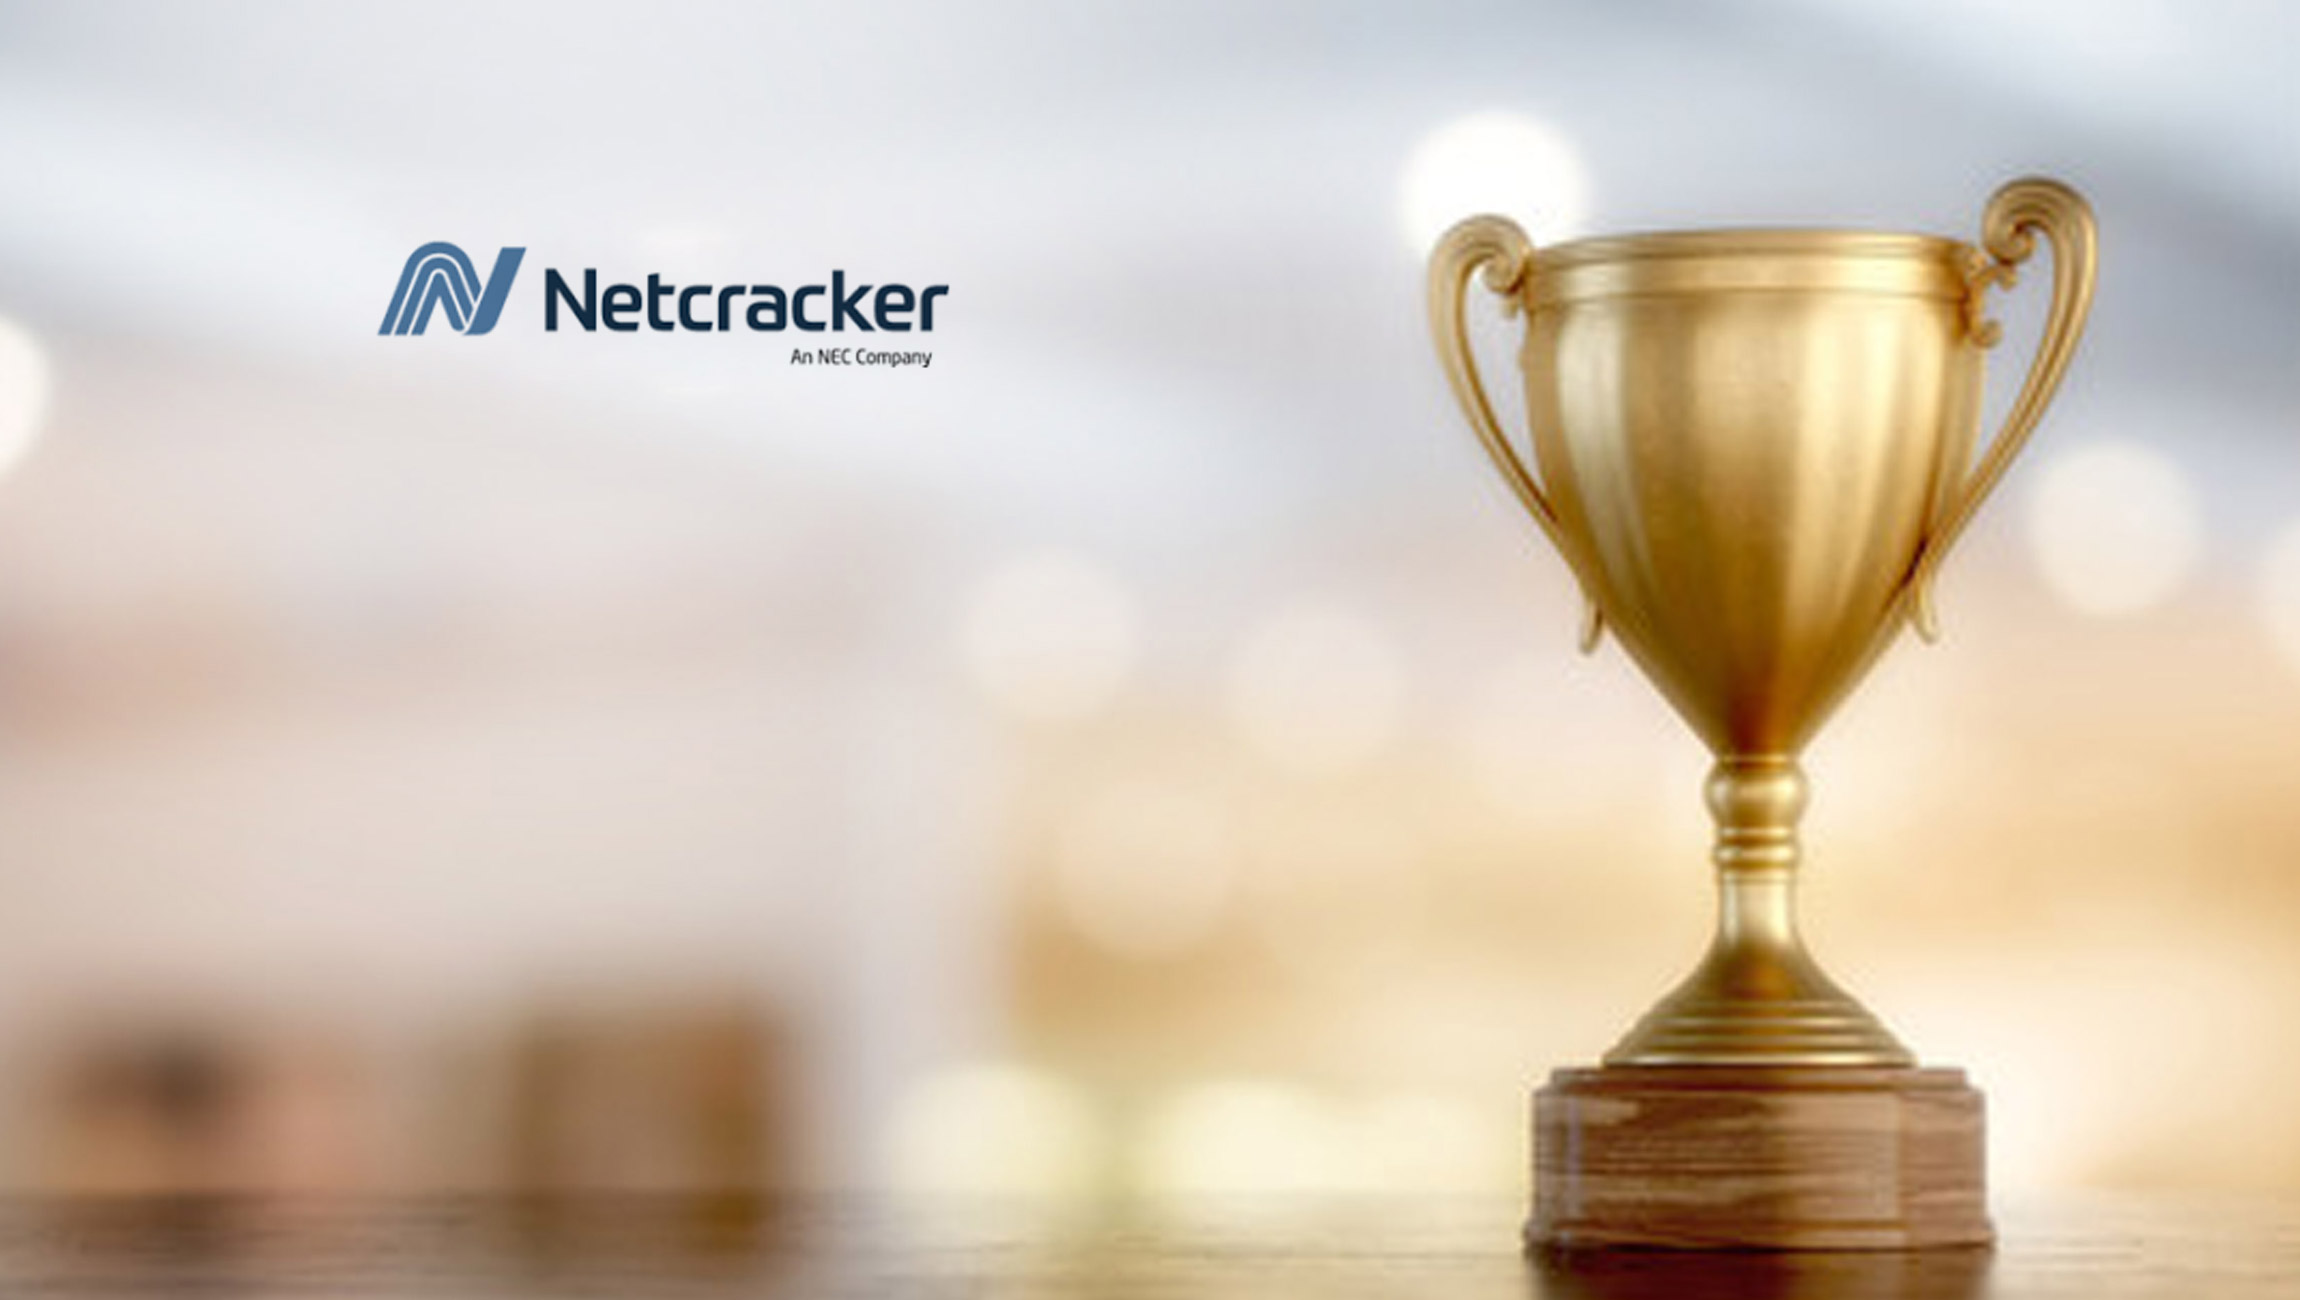 Netcracker Wins Awards for Virtualization and 5G Innovator of the Year